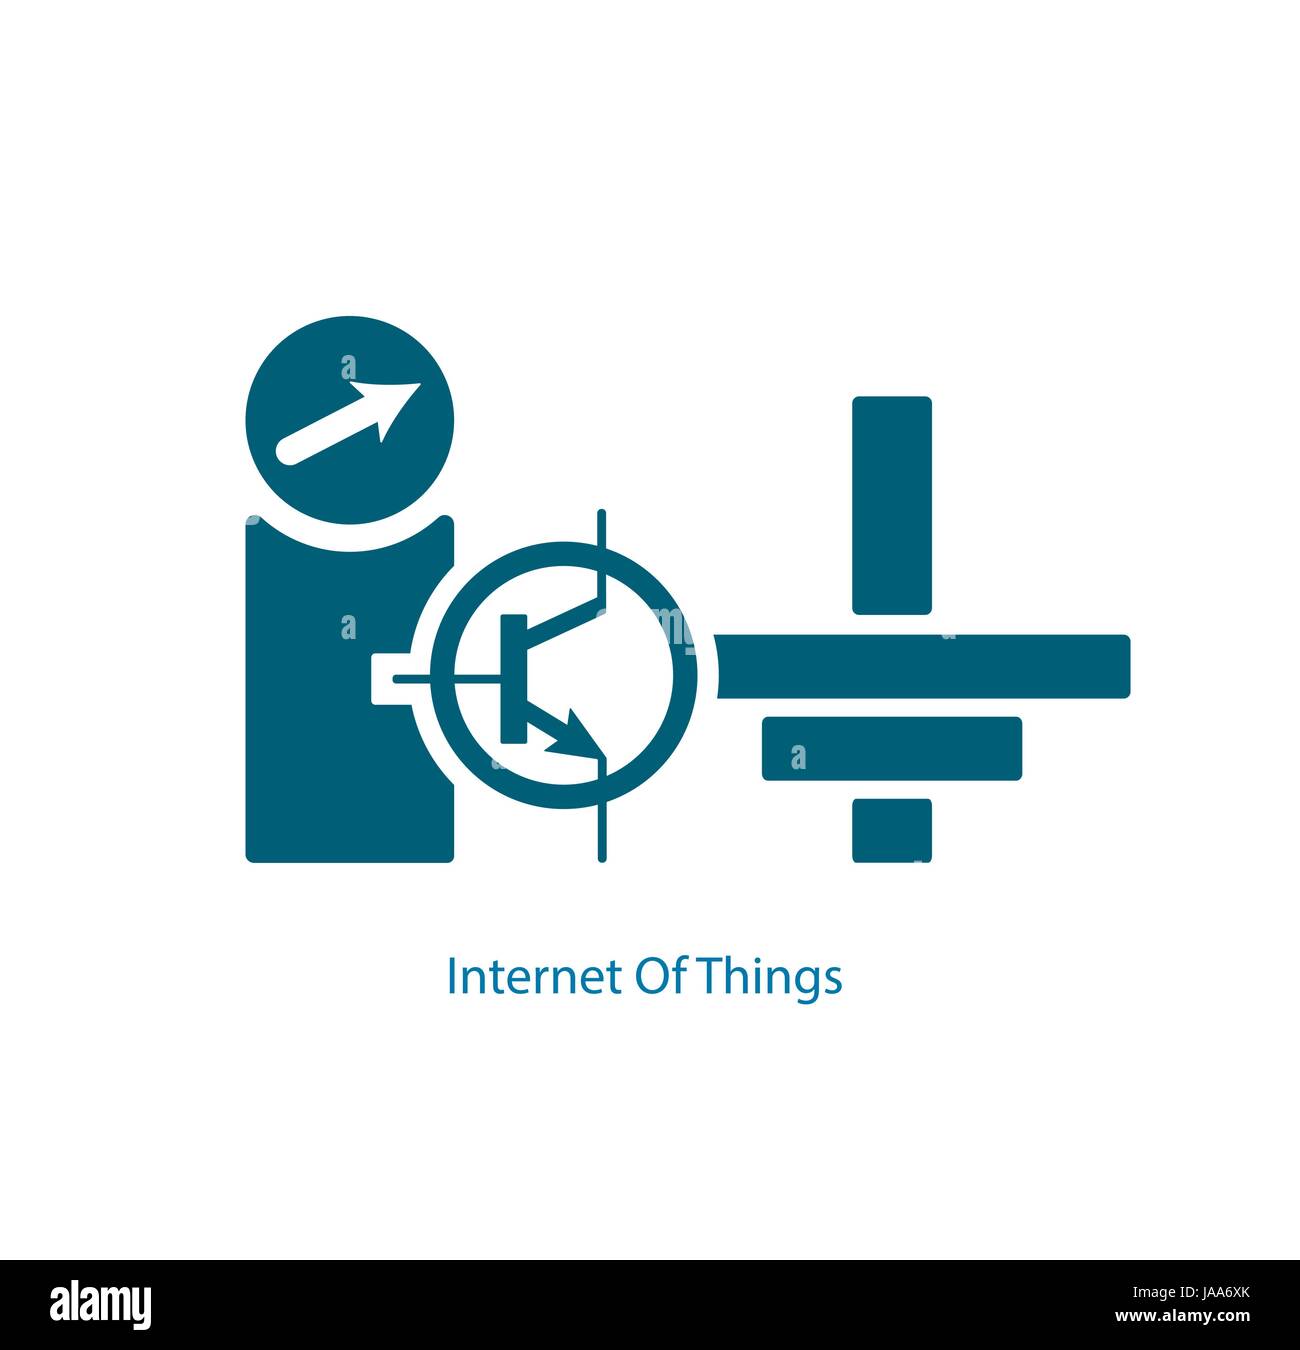 Internet Of Things from electrical transistor and grounding symbols. Modern consumer and industrial IoT technology sign vector illustration. Stock Vector